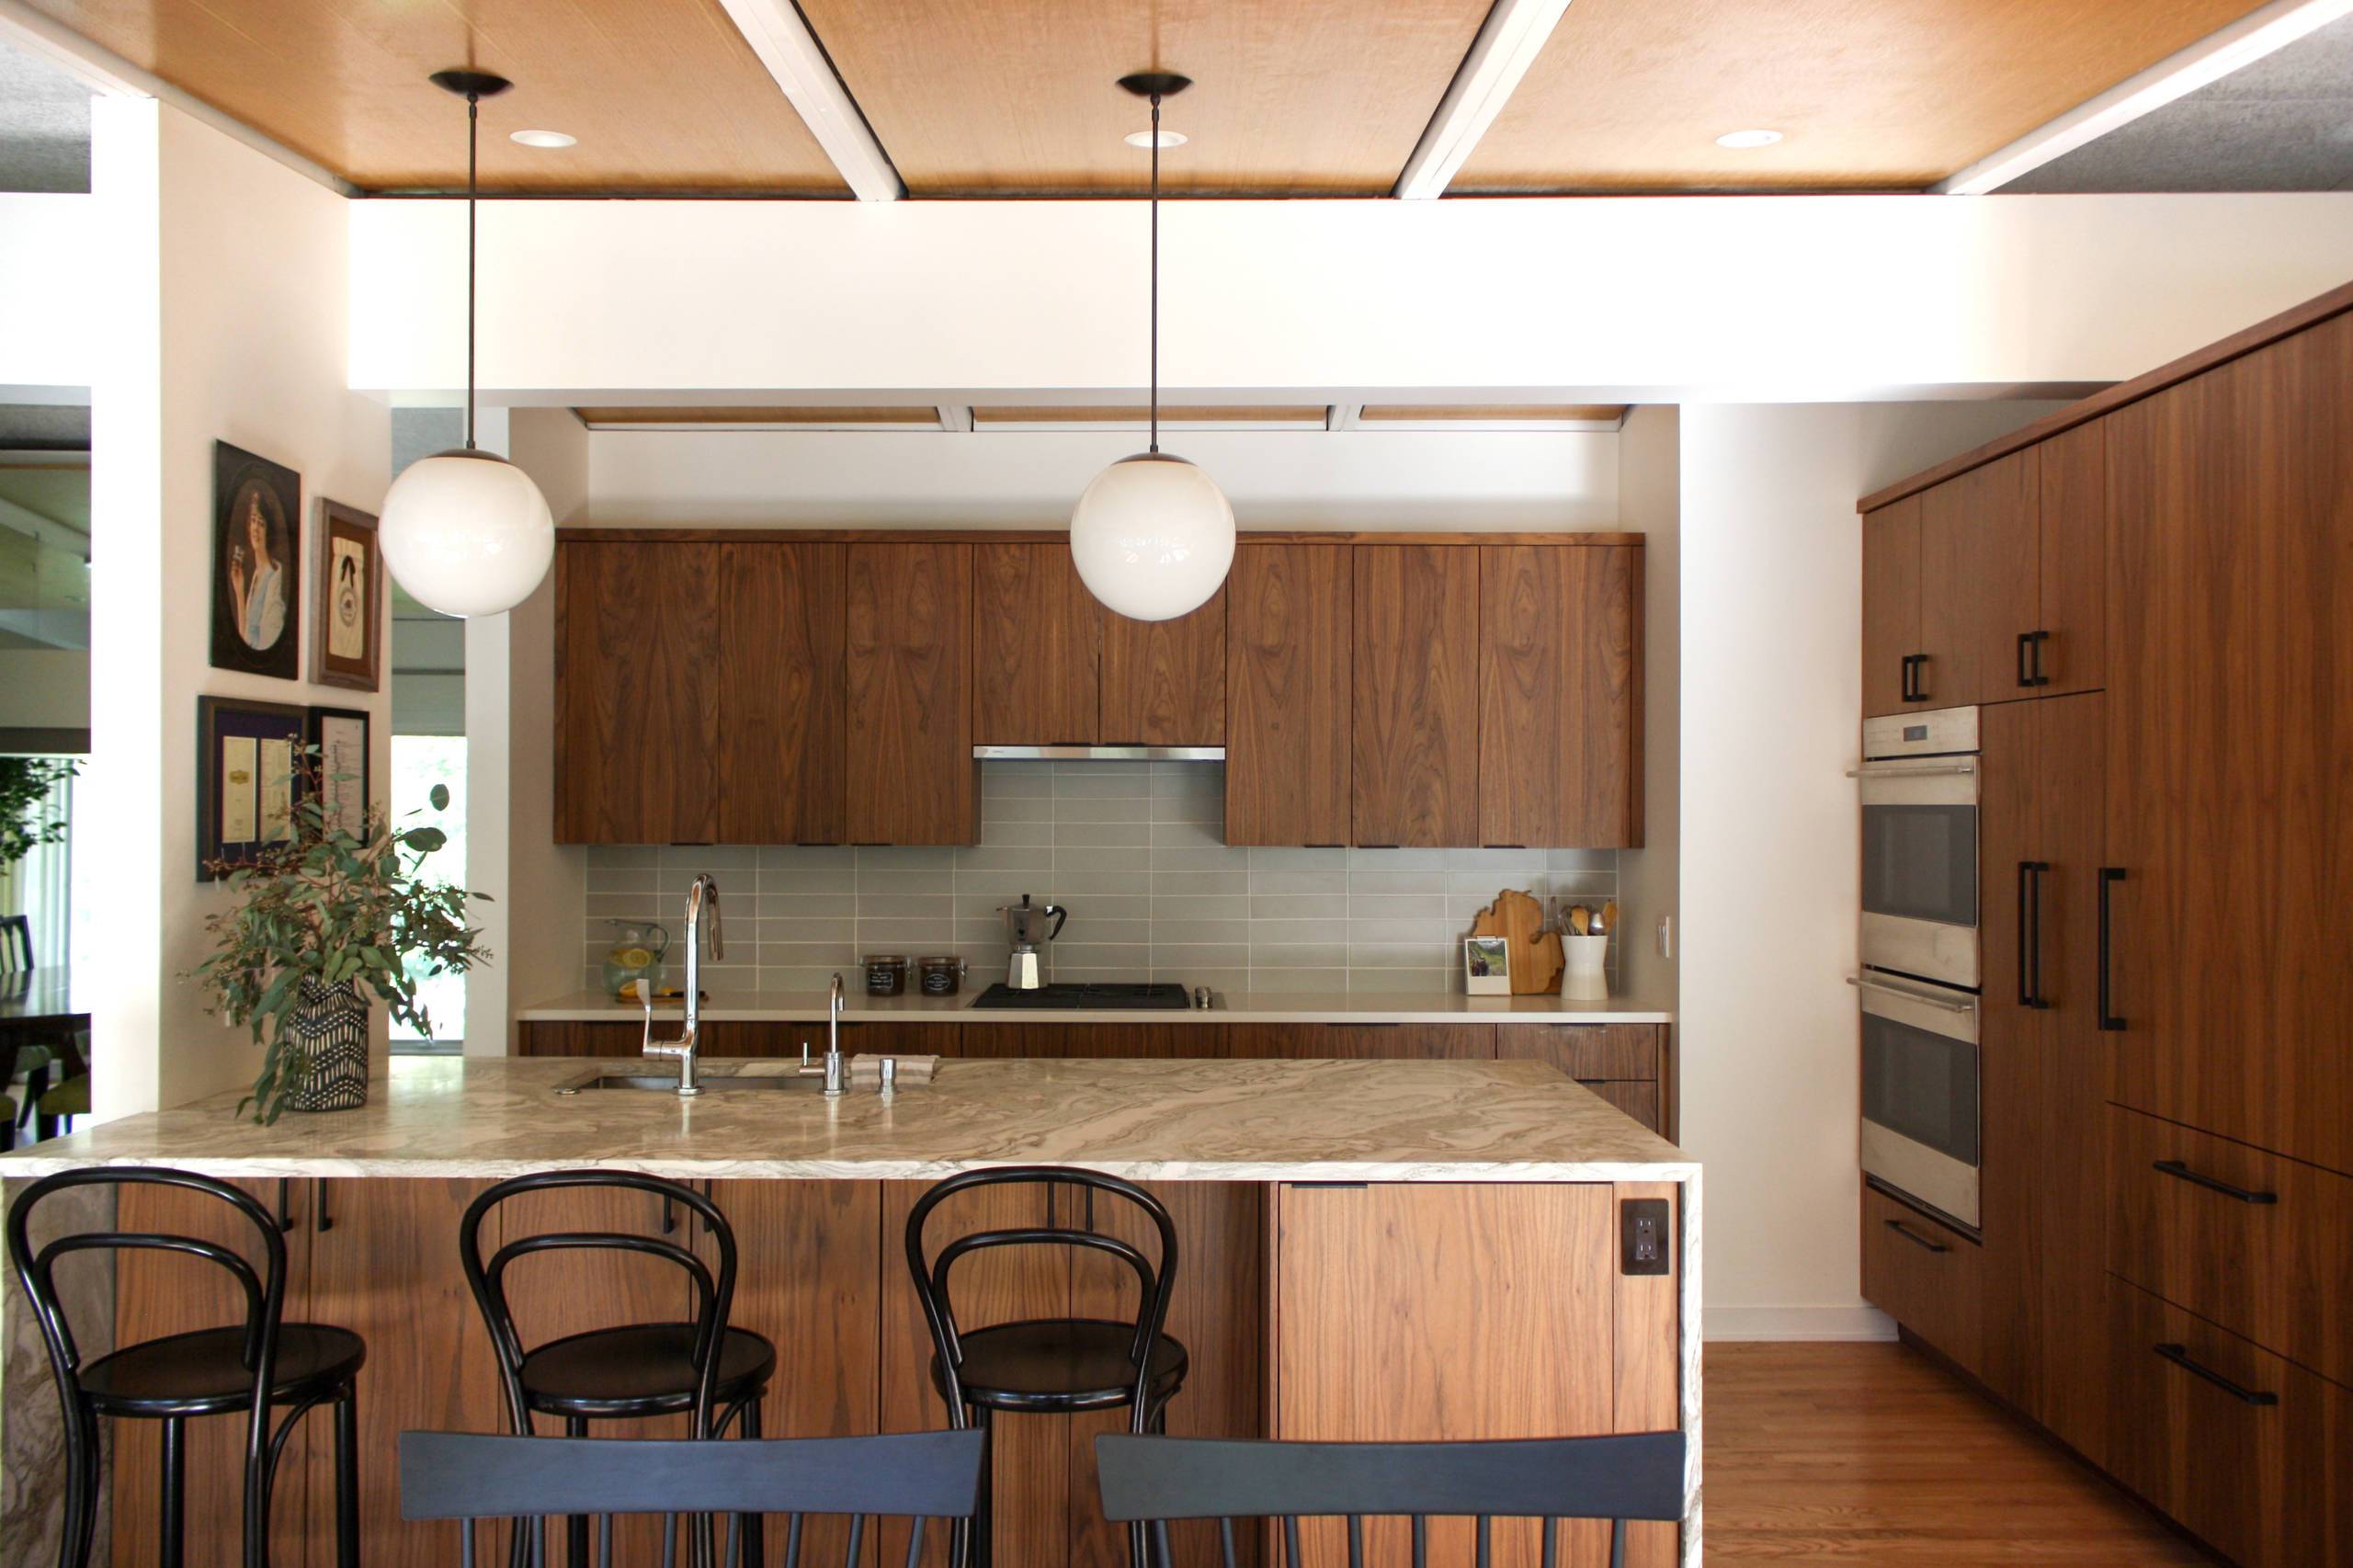 A clean mid-century kitchen with dark wood cabinets, black metal chairs, and an island with a sink.